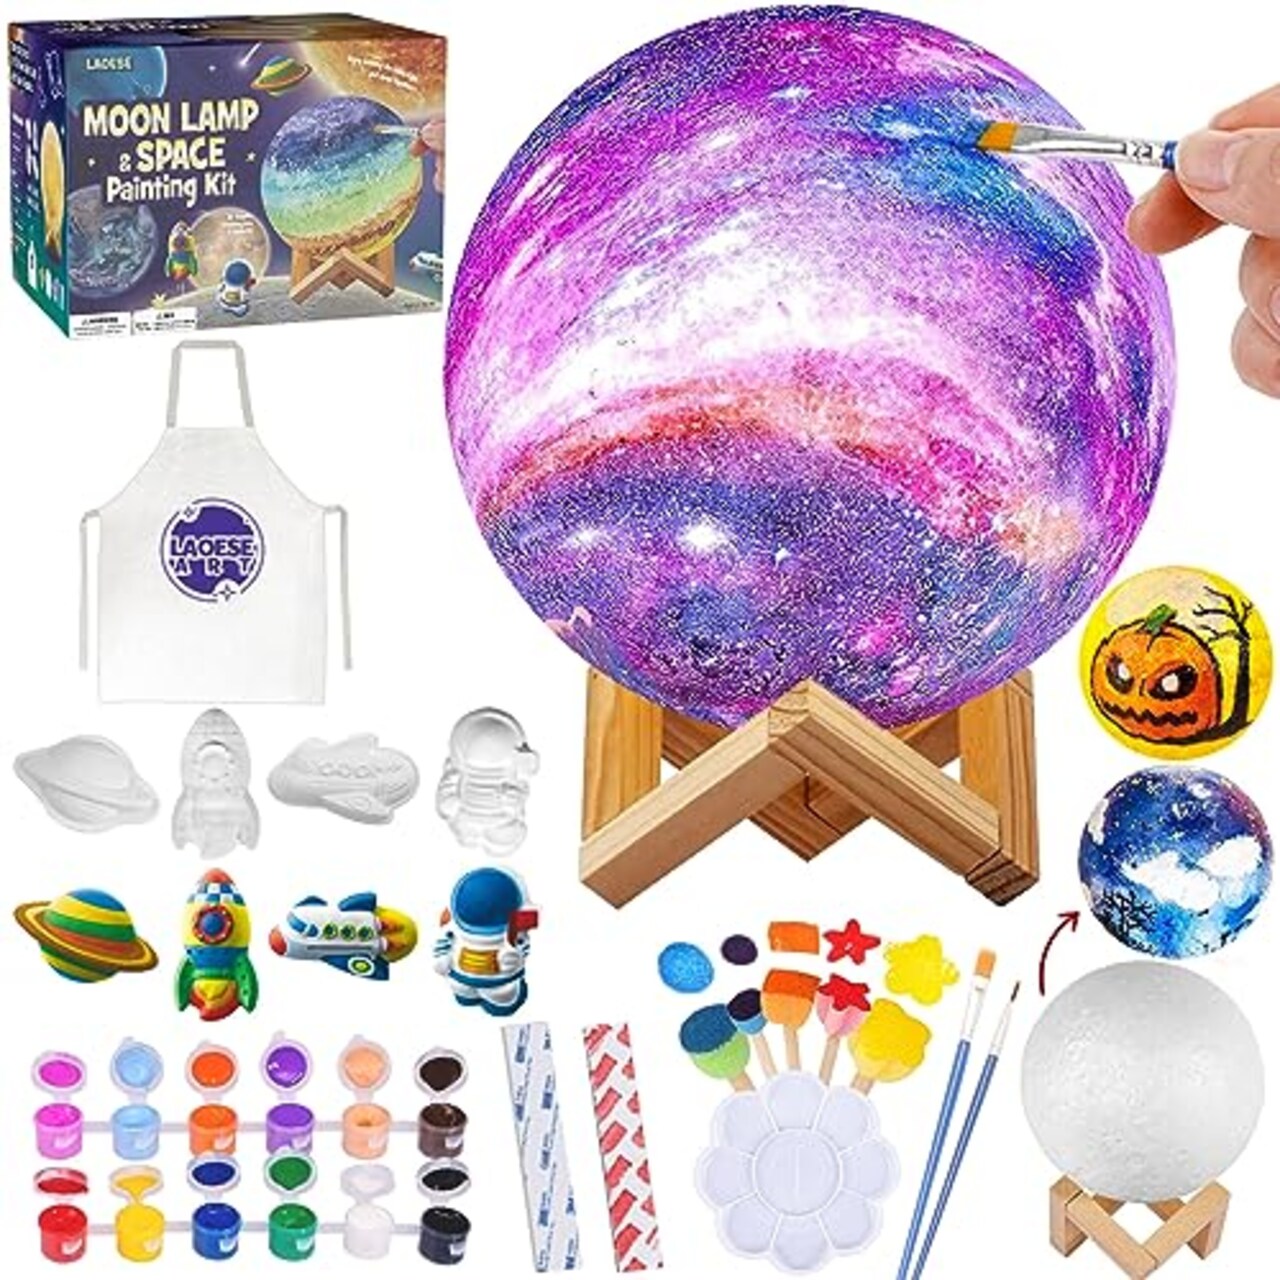 Paint Your Own Moon Lamp Kit, Halloween Gifts DIY Space Moon Night Light, Art Supplies Arts &#x26; Crafts Kit, Arts and Crafts for Kids Ages 8-12, Toys Girls Boy Birthday Gift Ages 3 4 5 6 7 8 9 10 11 12+